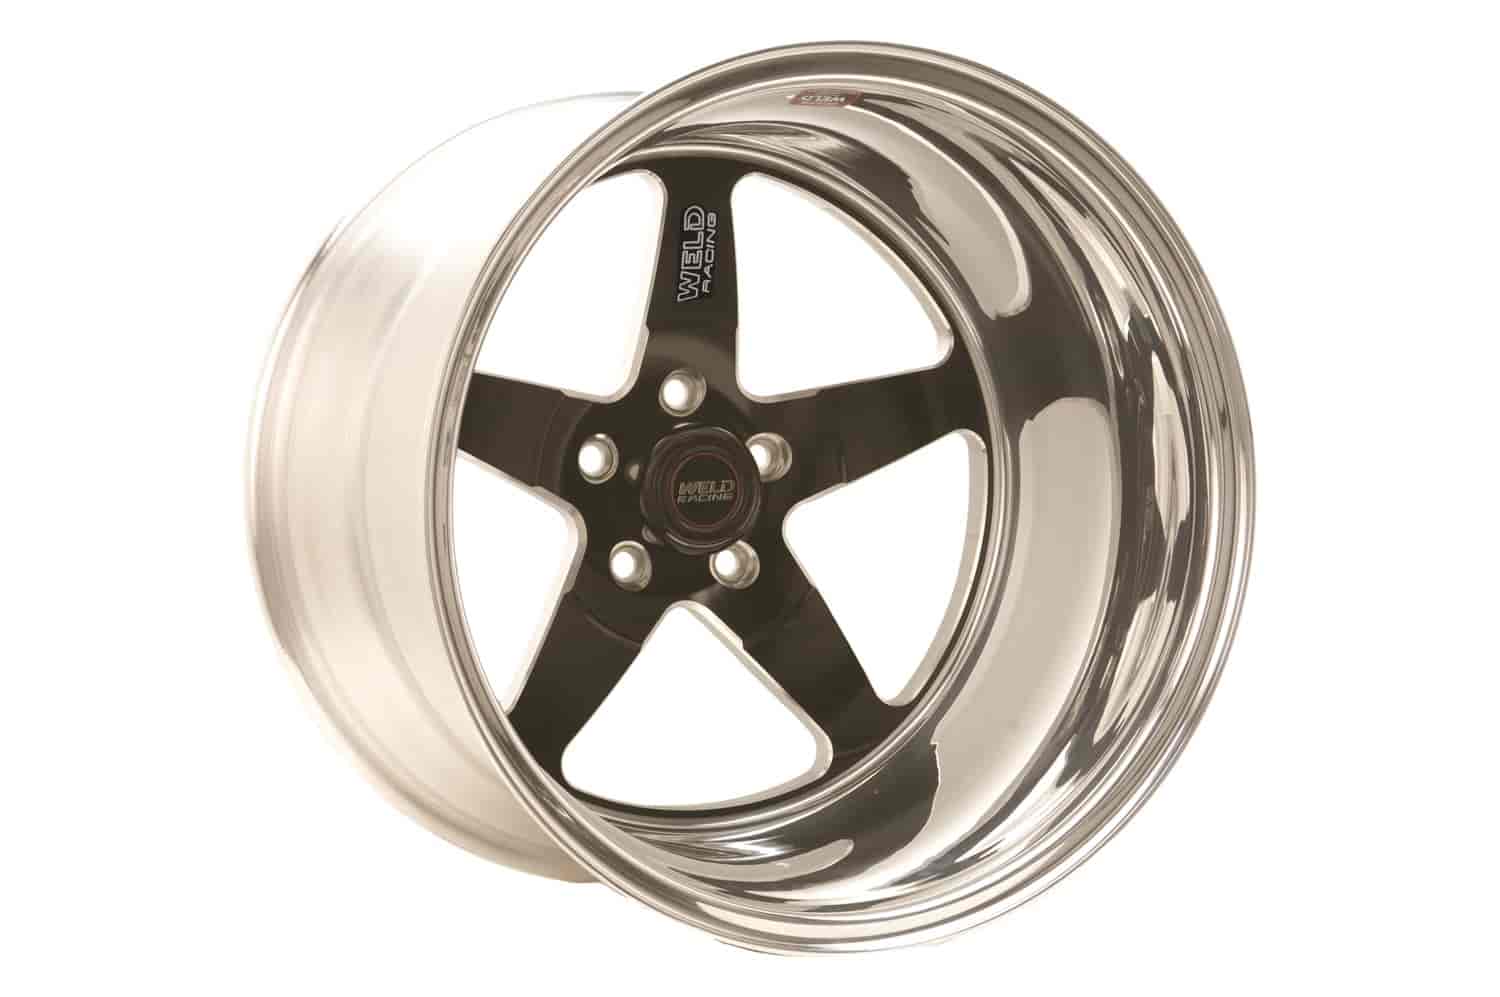 RT-S Series S71 Wheel Size: 15" x 6" Bolt Circle: 5 x 4-3/4" Back Space: 4-1/2"